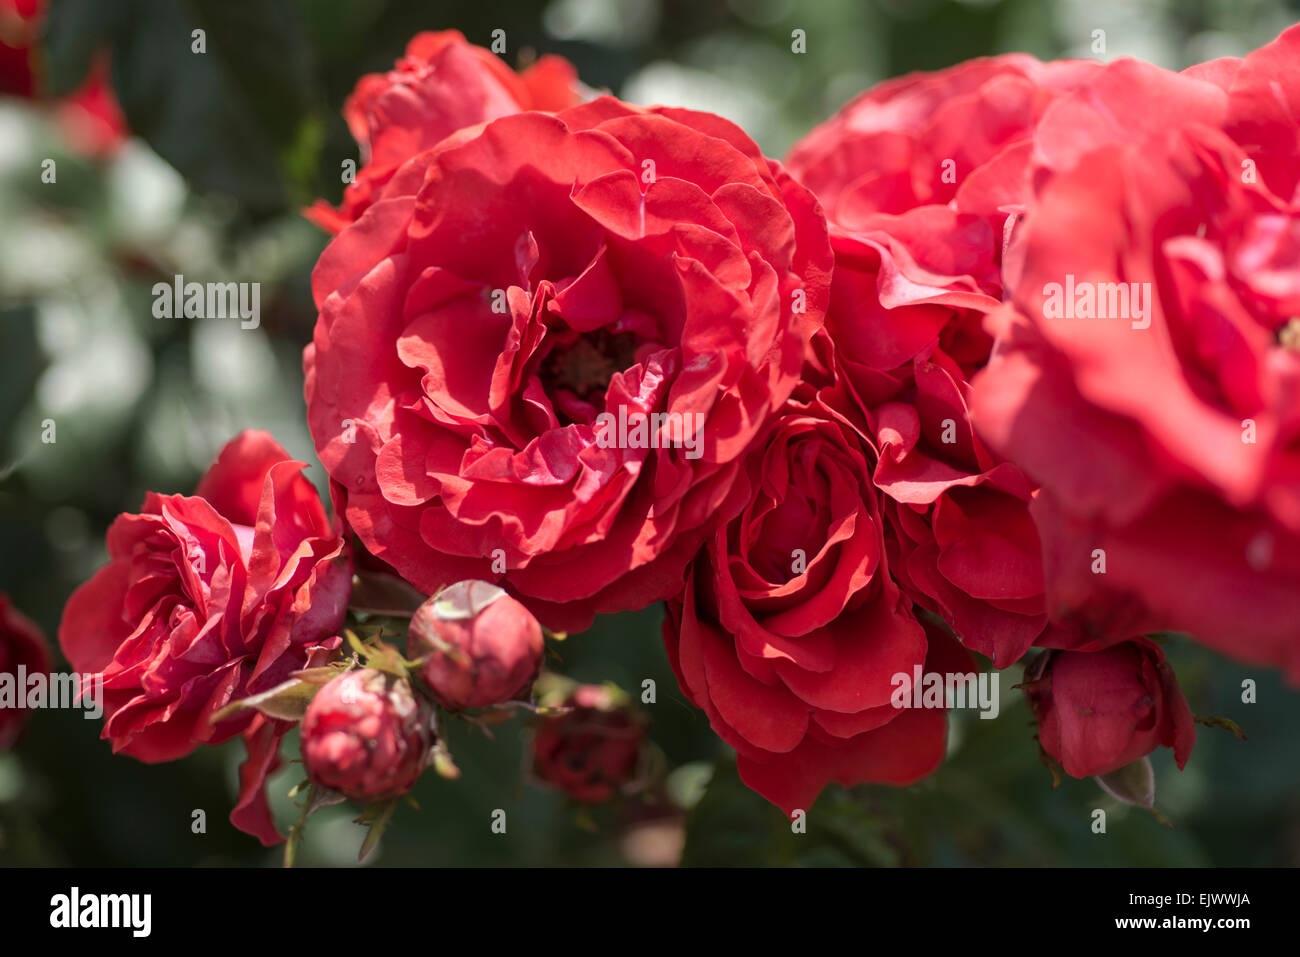 Red Rose Vermillion High Resolution Stock Photography and Images - Alamy